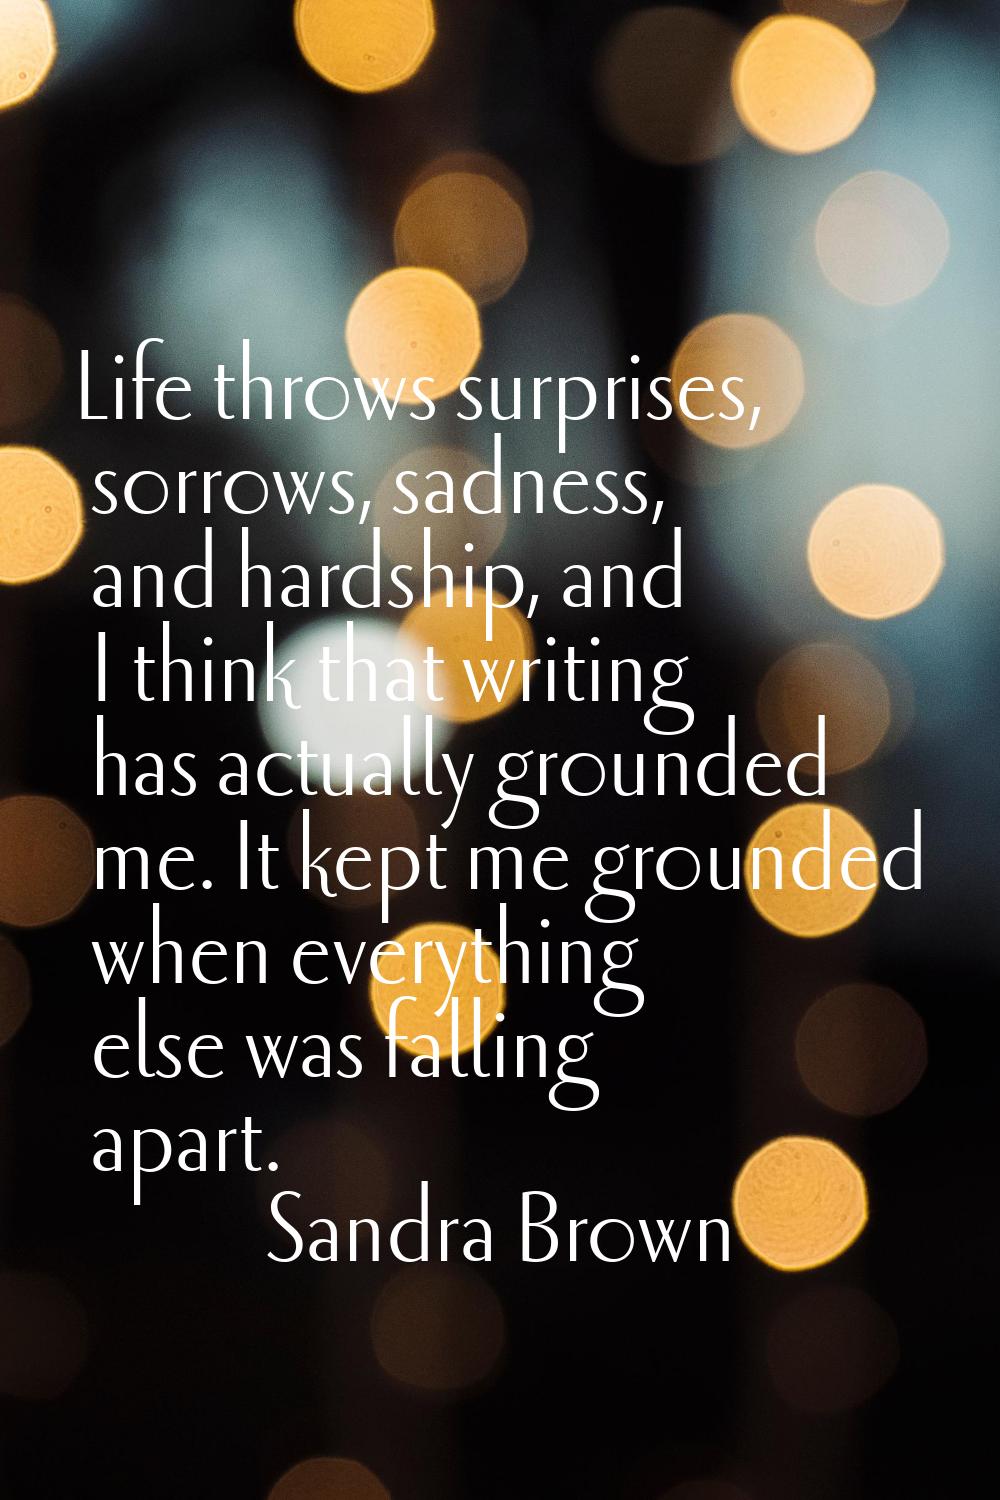 Life throws surprises, sorrows, sadness, and hardship, and I think that writing has actually ground